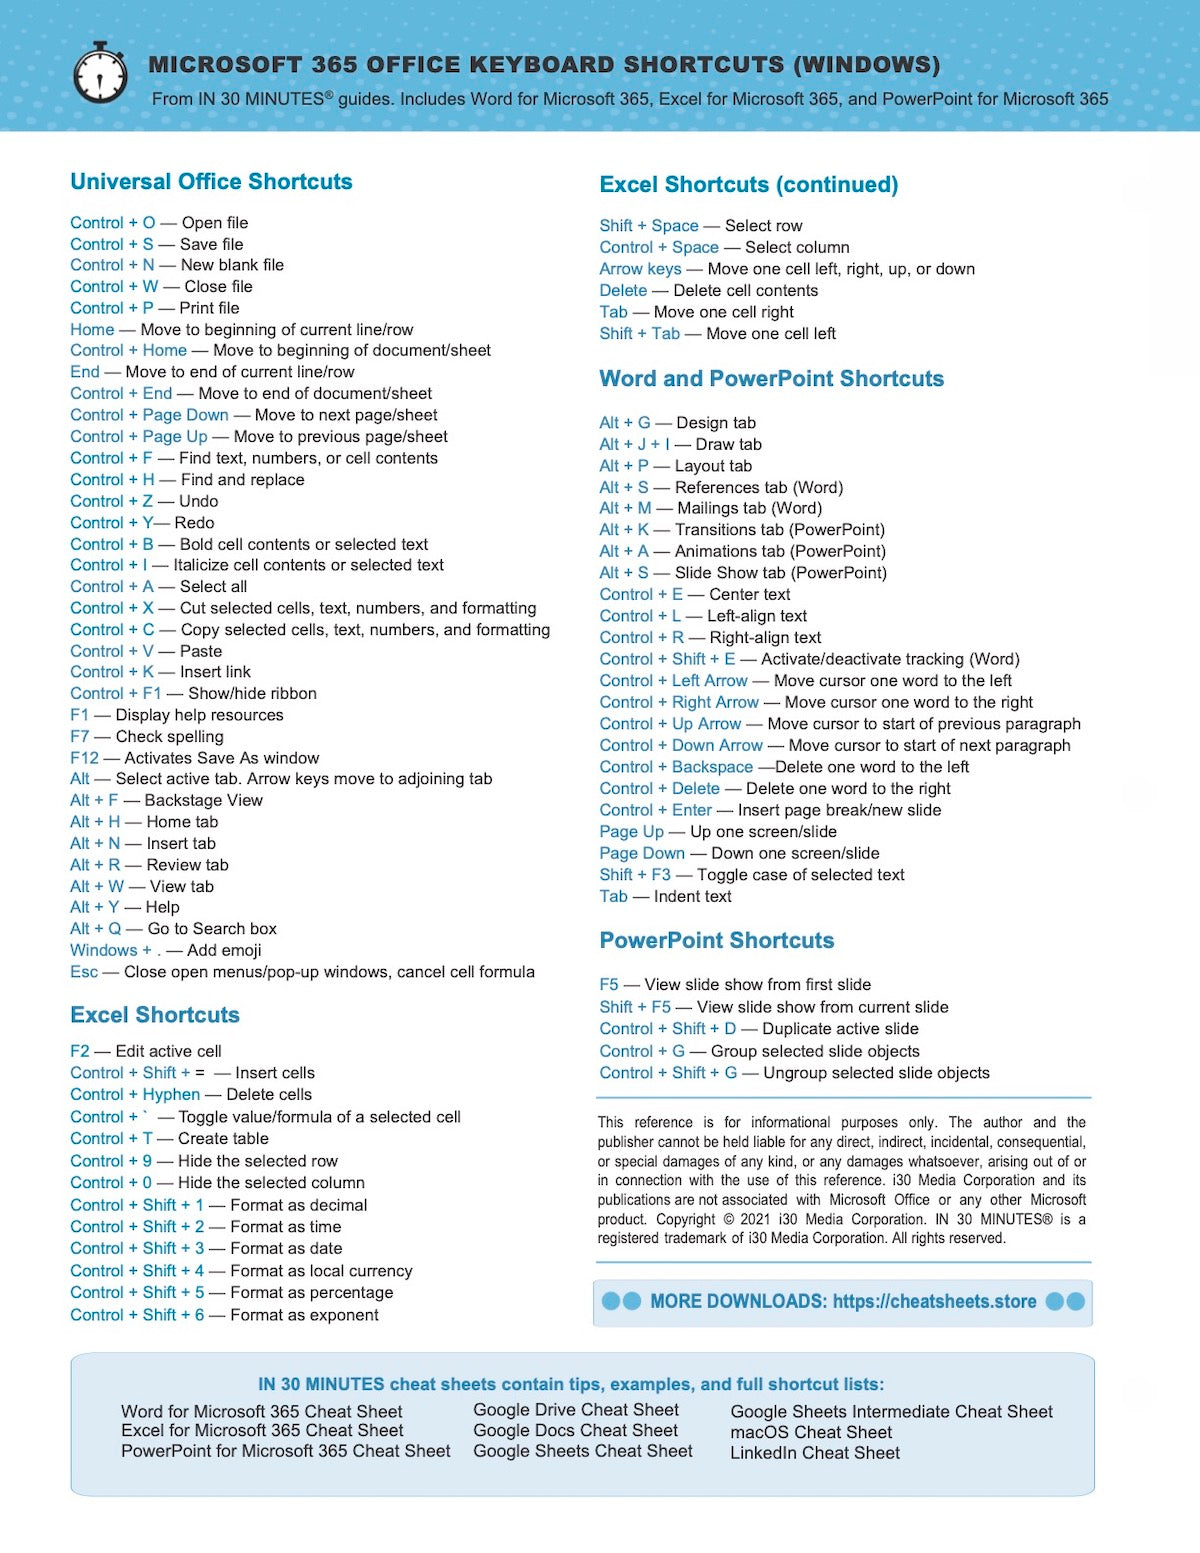 Office for Microsoft 365 Cheat Sheet: Windows Keyboard Shortcuts for Word, Excel, PowerPoint (PDF)